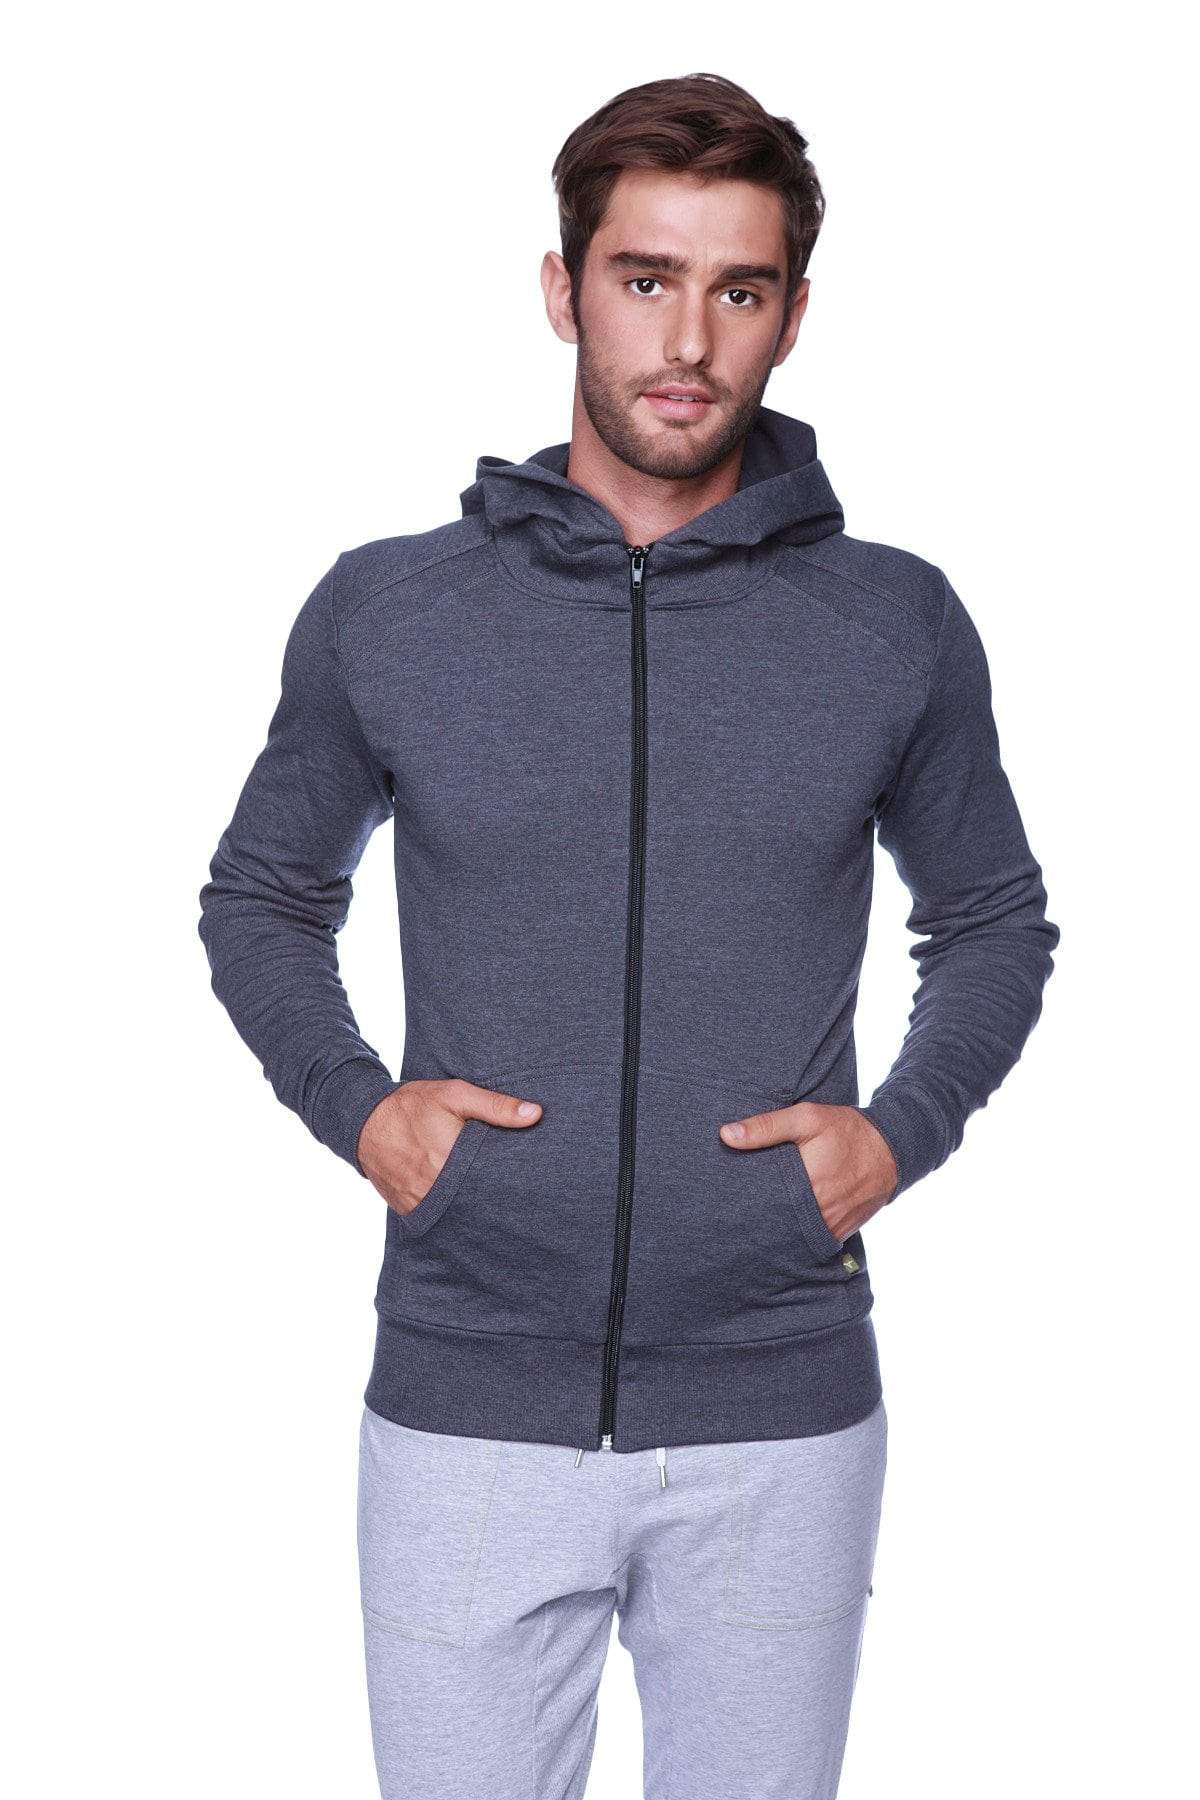 Form-fit Crossover Yoga Track Performance Hoodie (Charcoal) – 4-rth